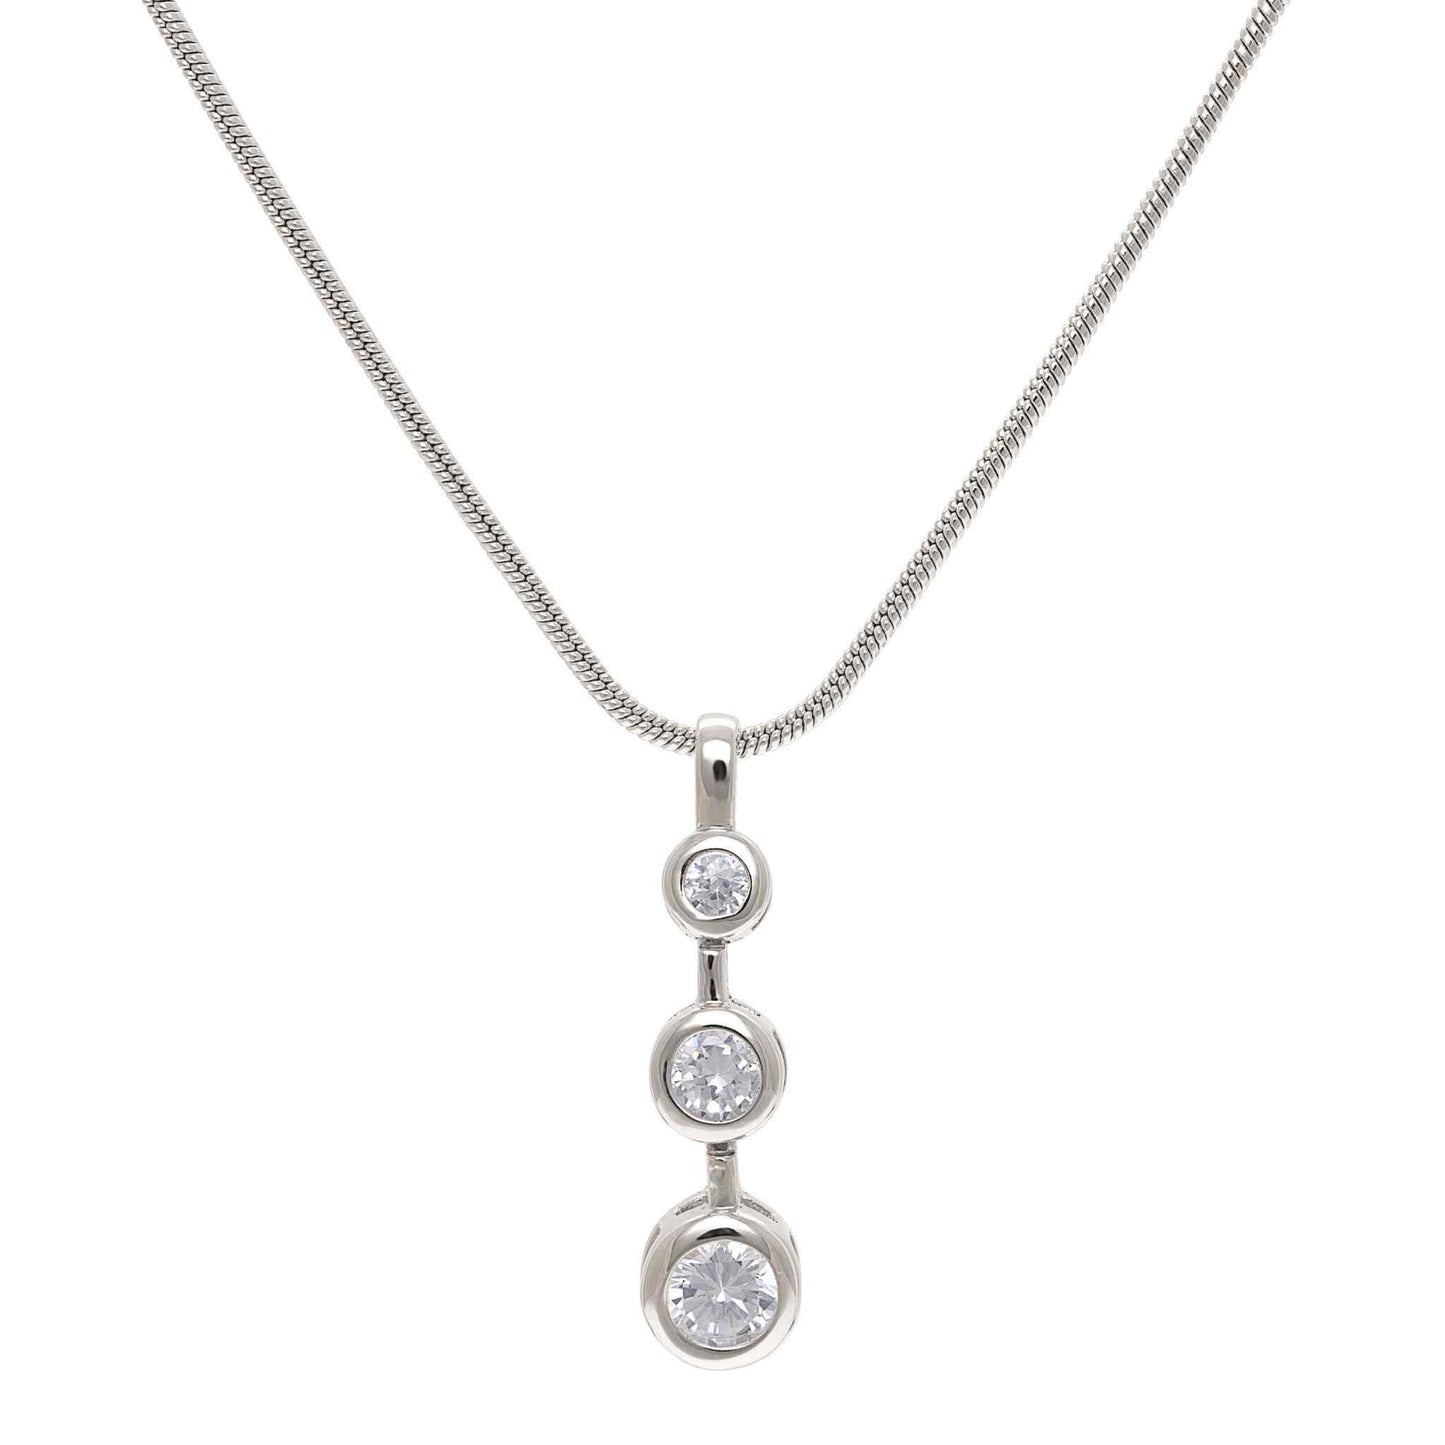 A three stone bezel set simulated diamond necklace displayed on a neutral white background.